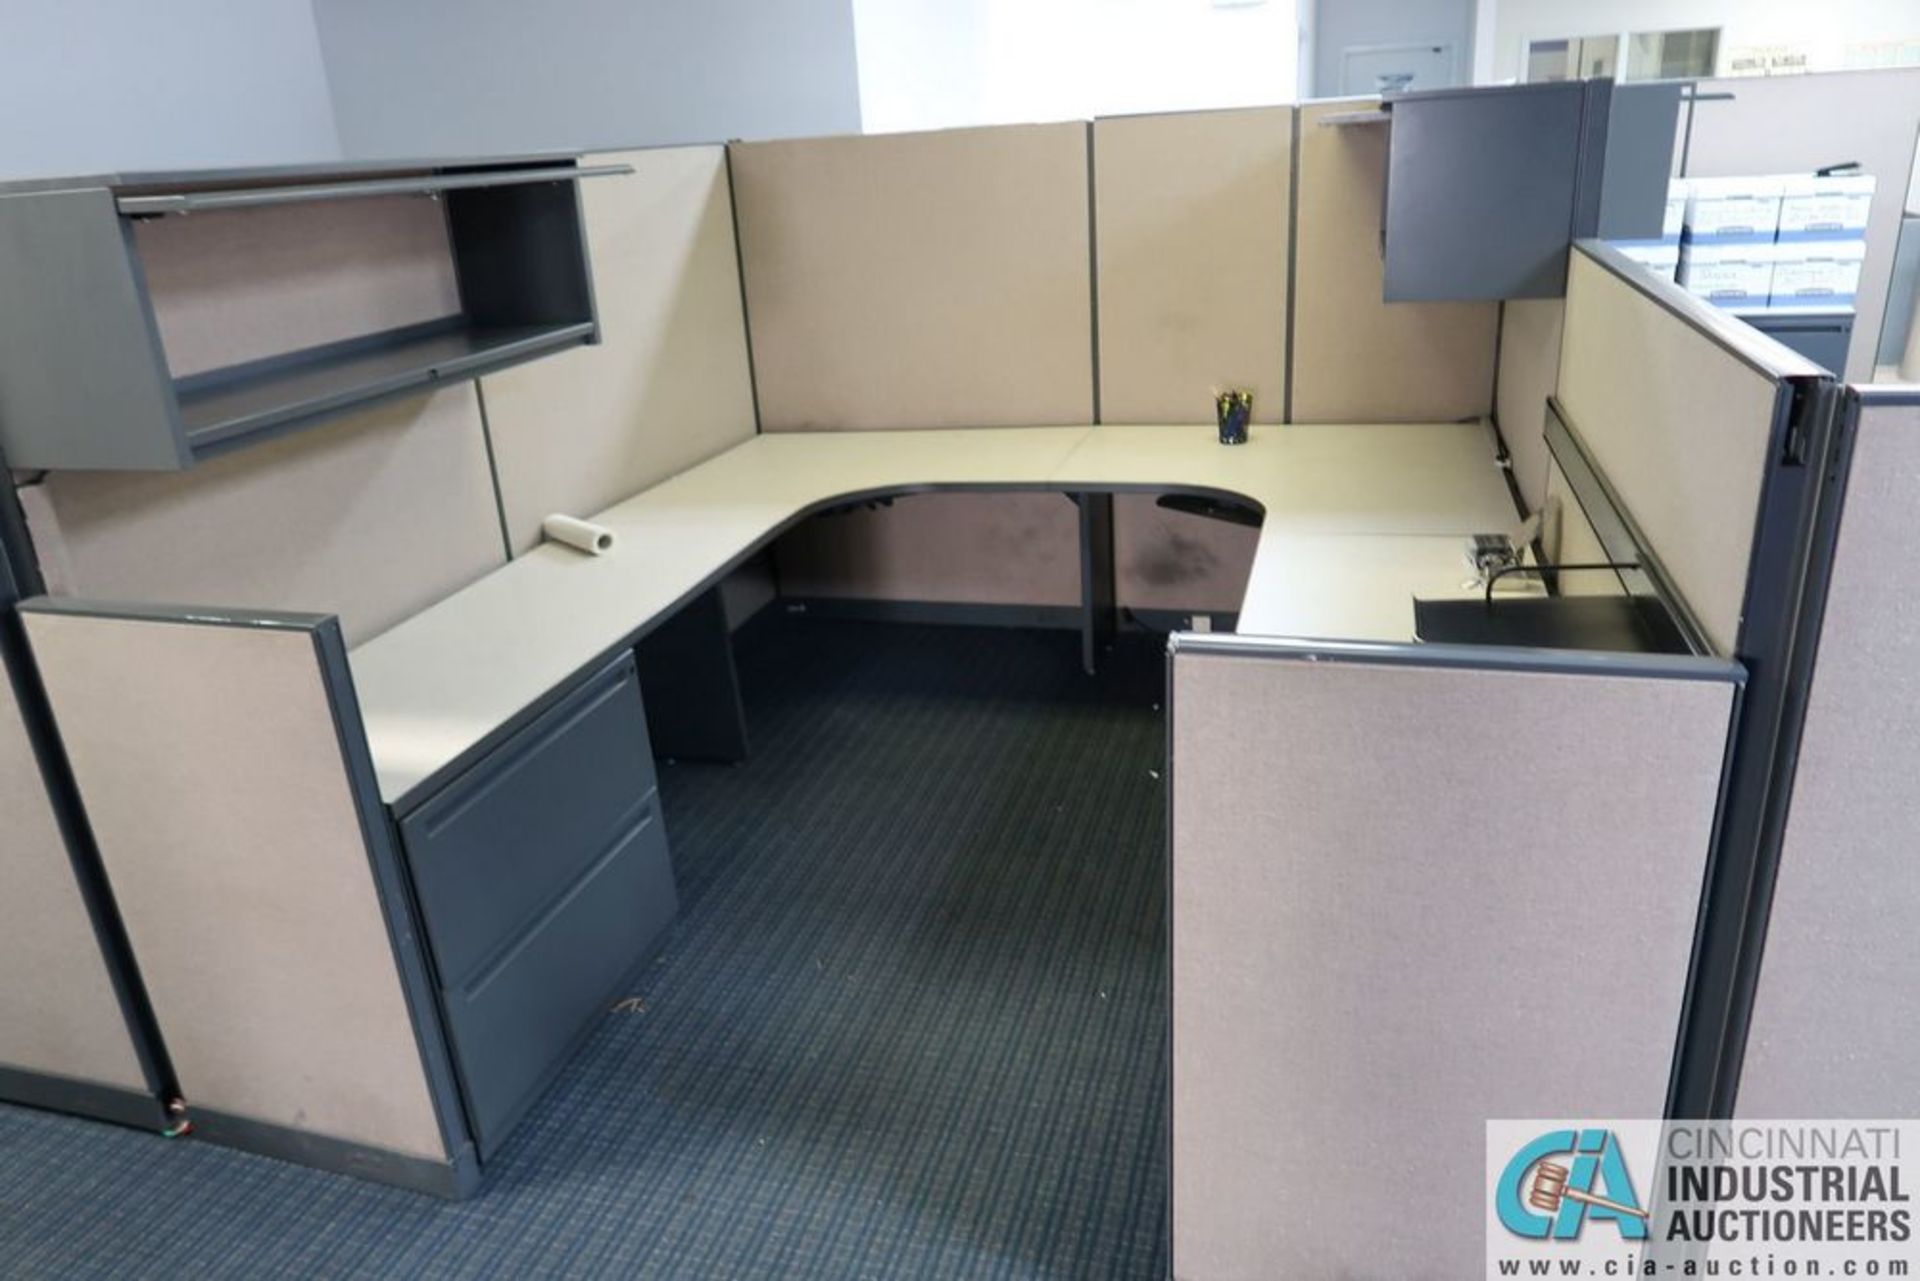 (LOT) OFFICE CUBICLES, (2) 72" X 72", (2) 100" X 92", (2) 112" X 96", (1) 216" X 72" - Image 9 of 10